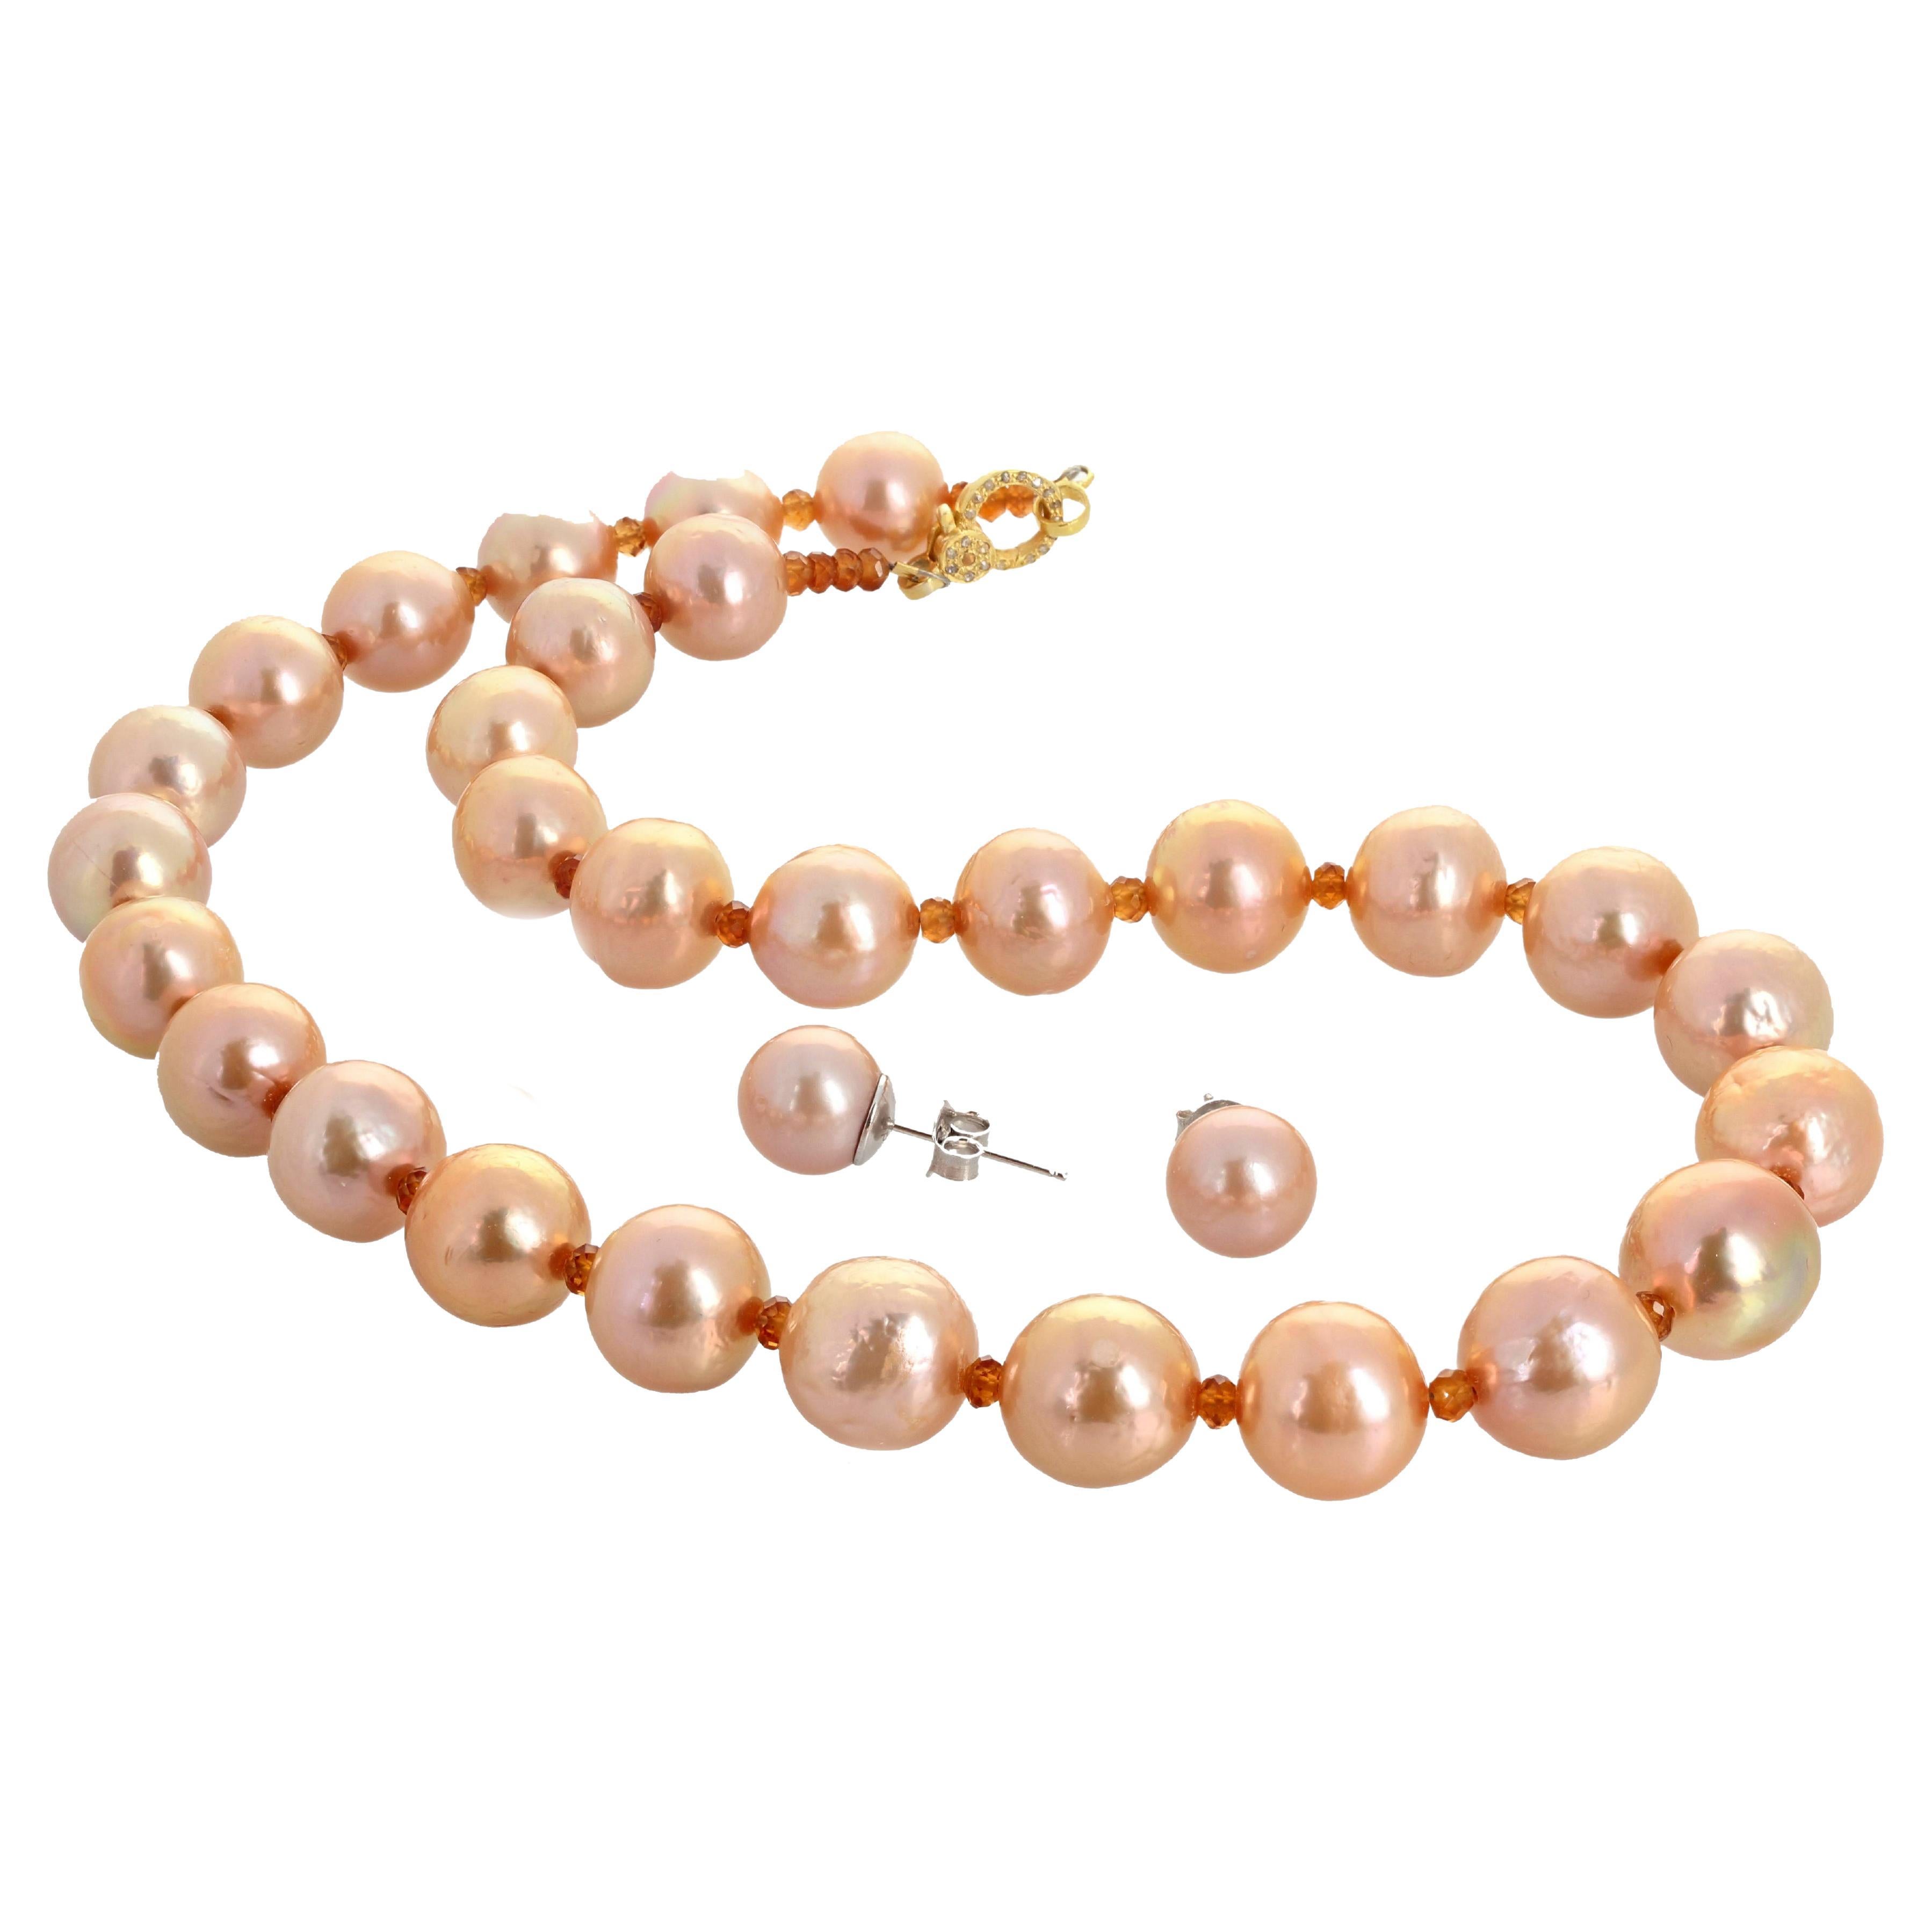 These magnificent Ocean Cultured Pearls - 13 to 15 mm - are enhanced with glittering gem cut Spessartites set in this unique 19 inch long necklace with vermeil encrusted diamond easy to use clasp..  The matching earrings are 11.5 mm.   This is quite